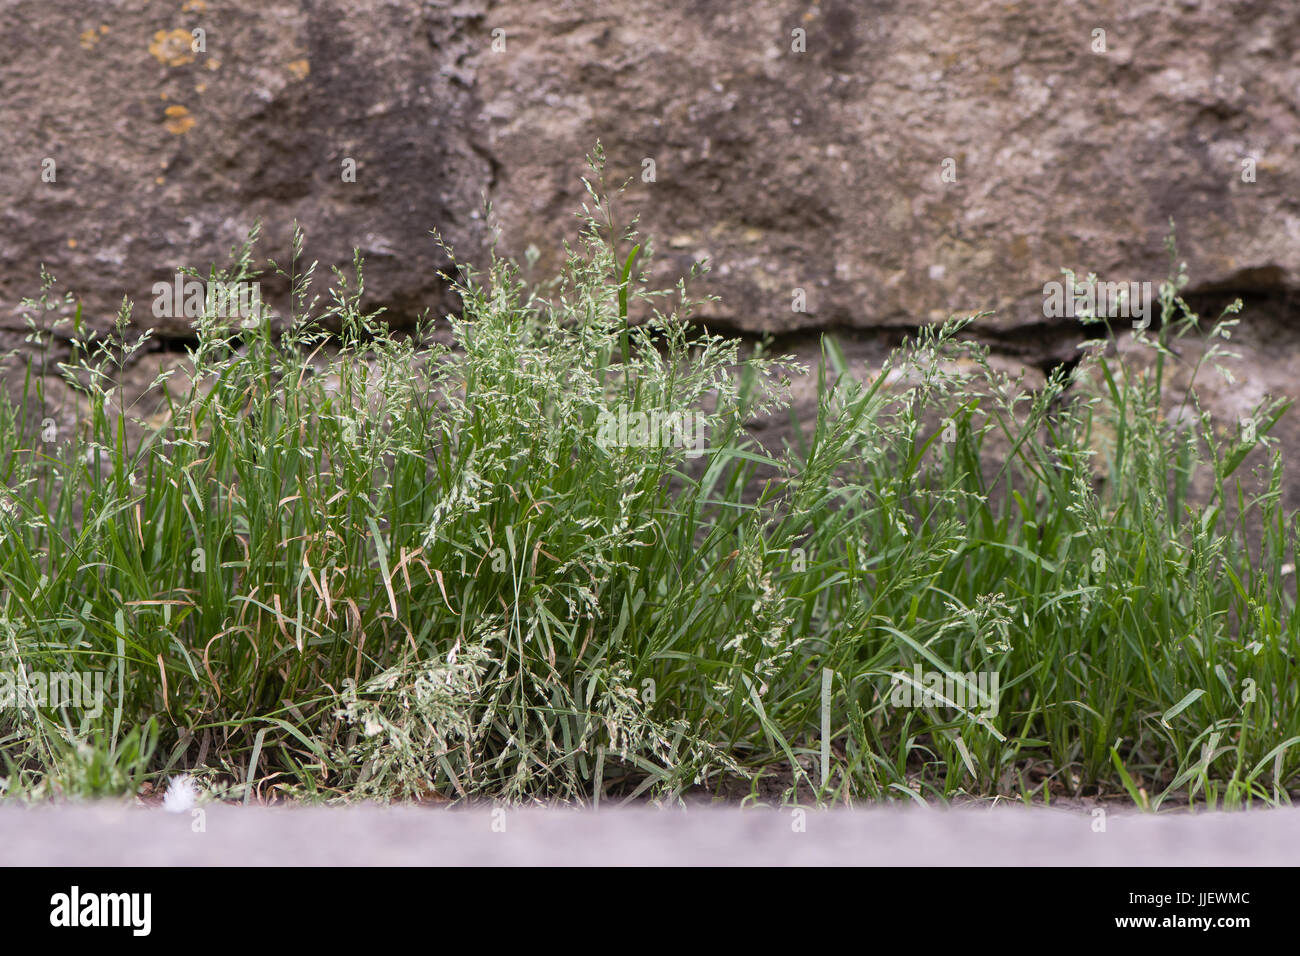 Annual meadow-grass (Poa annua) plants in flower. Abundant sprawling grass in the family Poaceae flowering against wall in British countryside Stock Photo